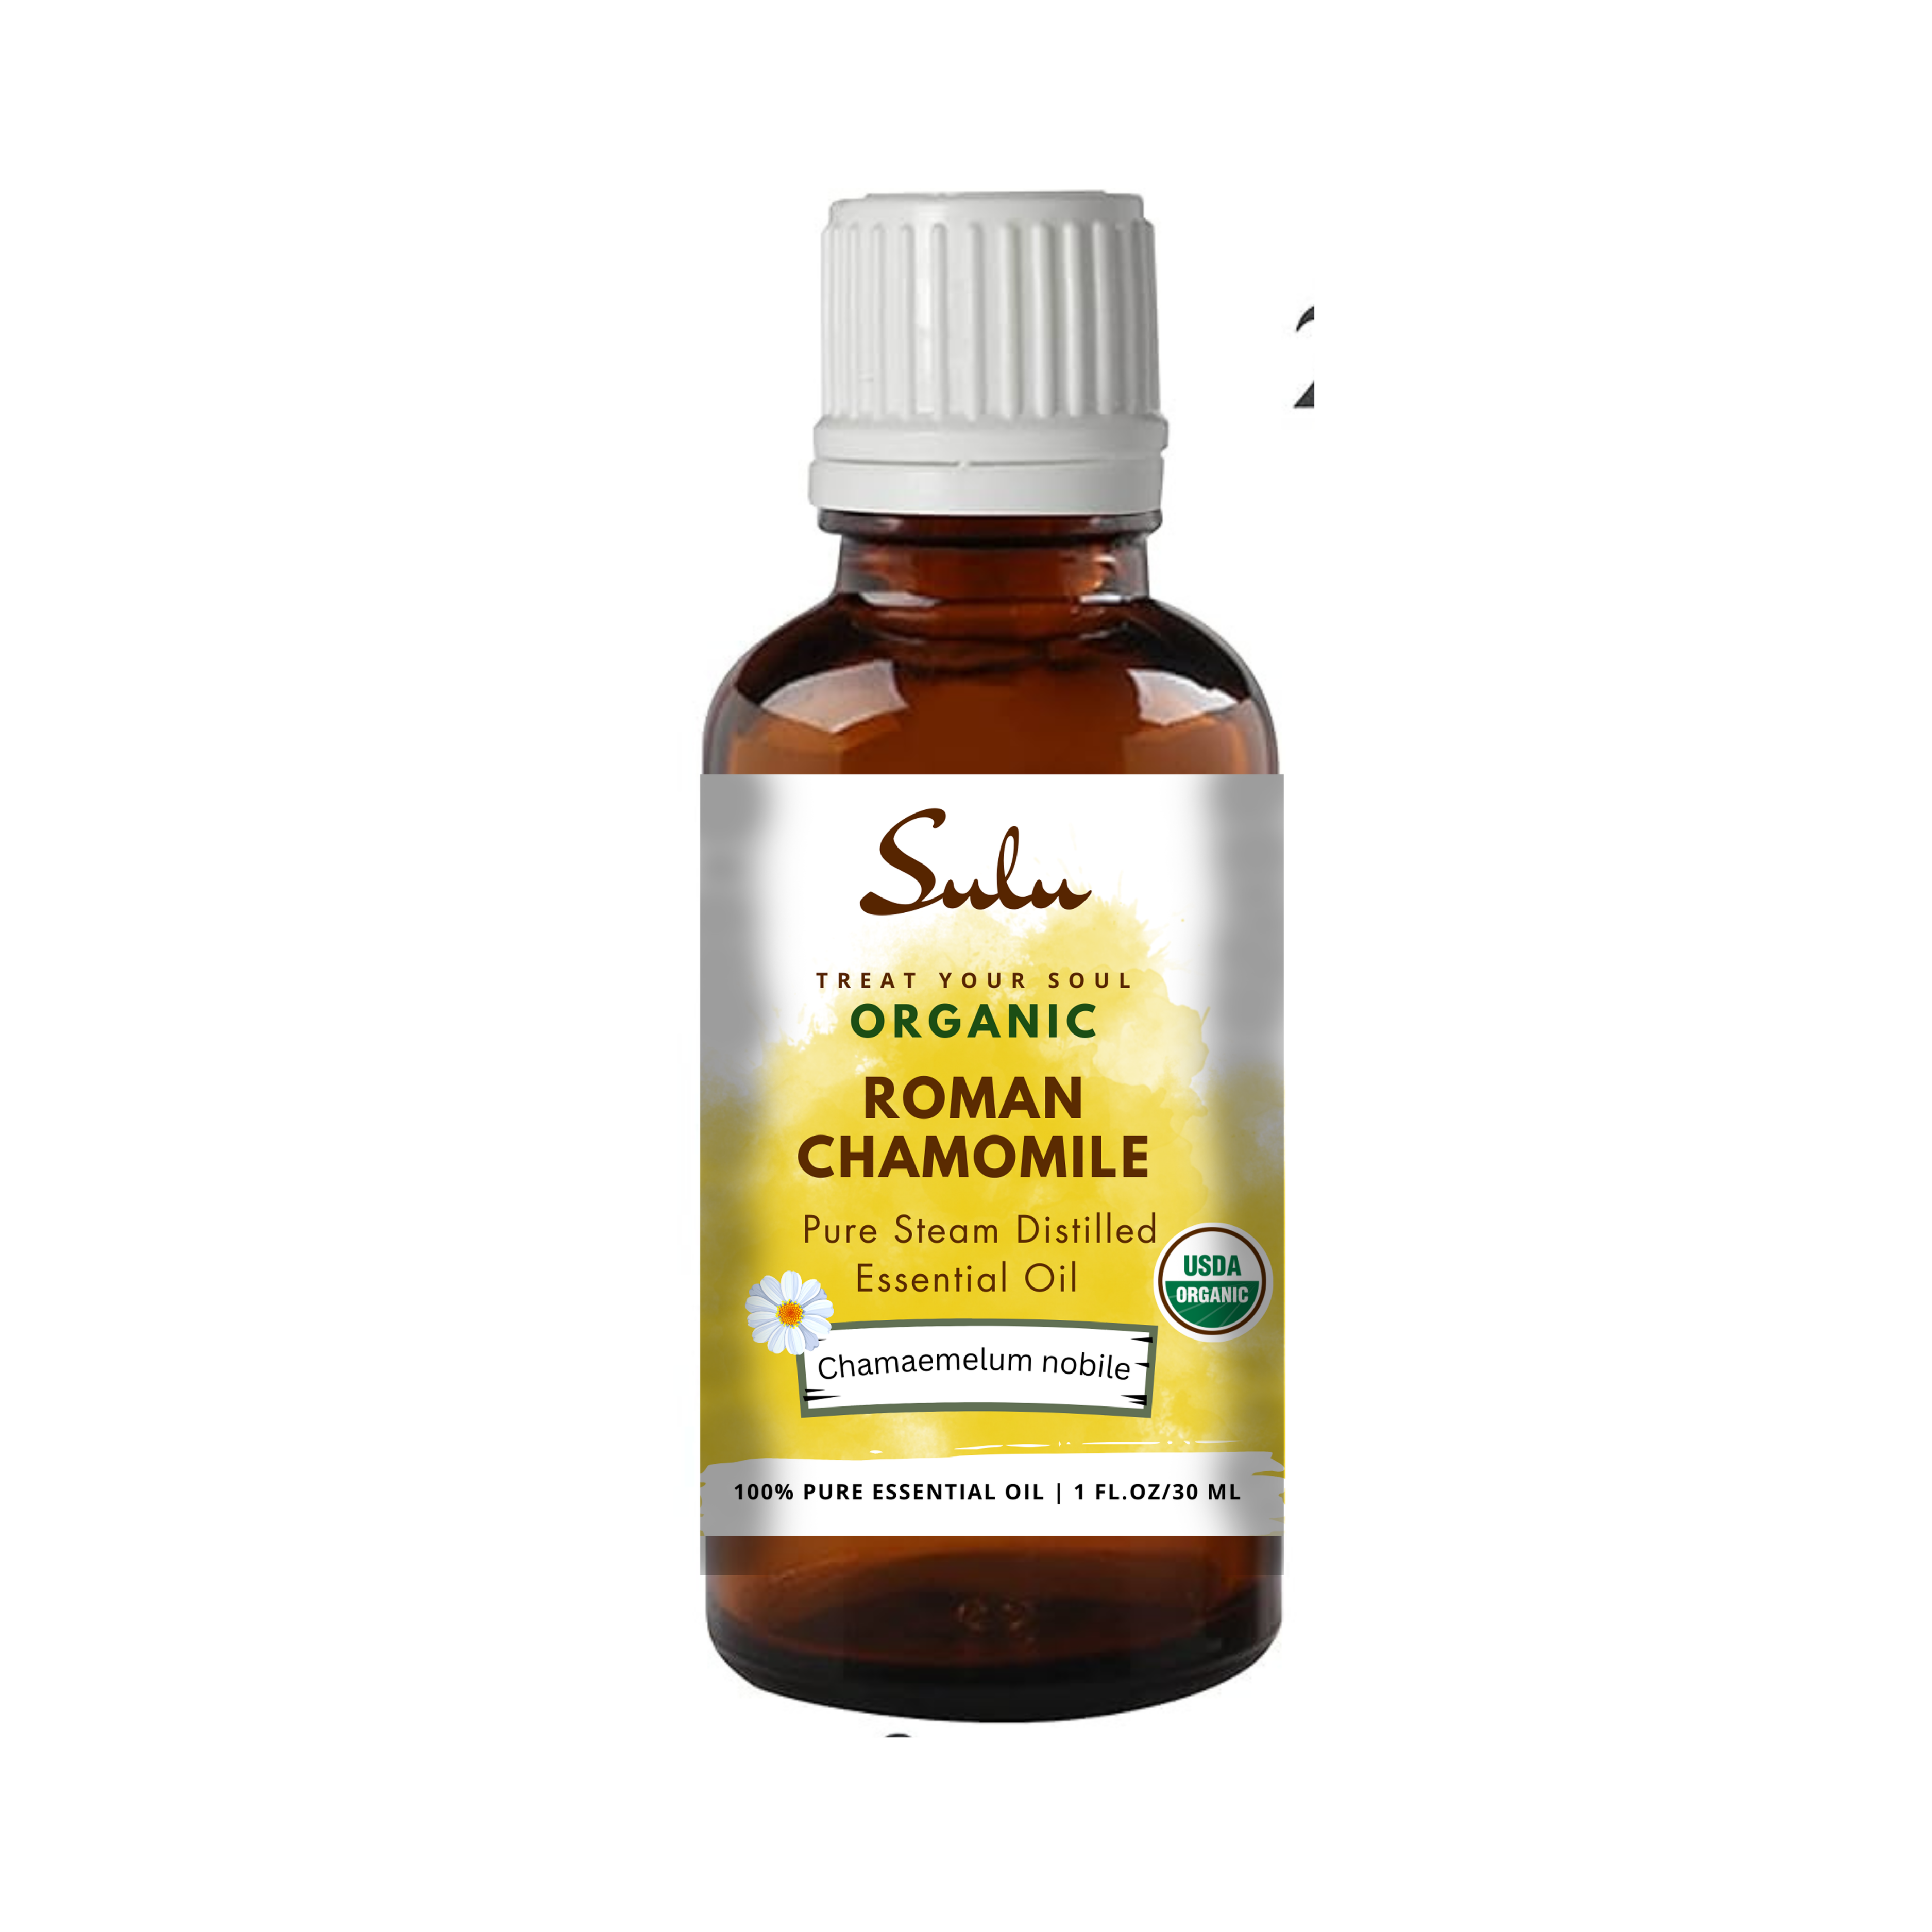 US Organic Chamomile Essential Oil (German), 100% Pure Certified